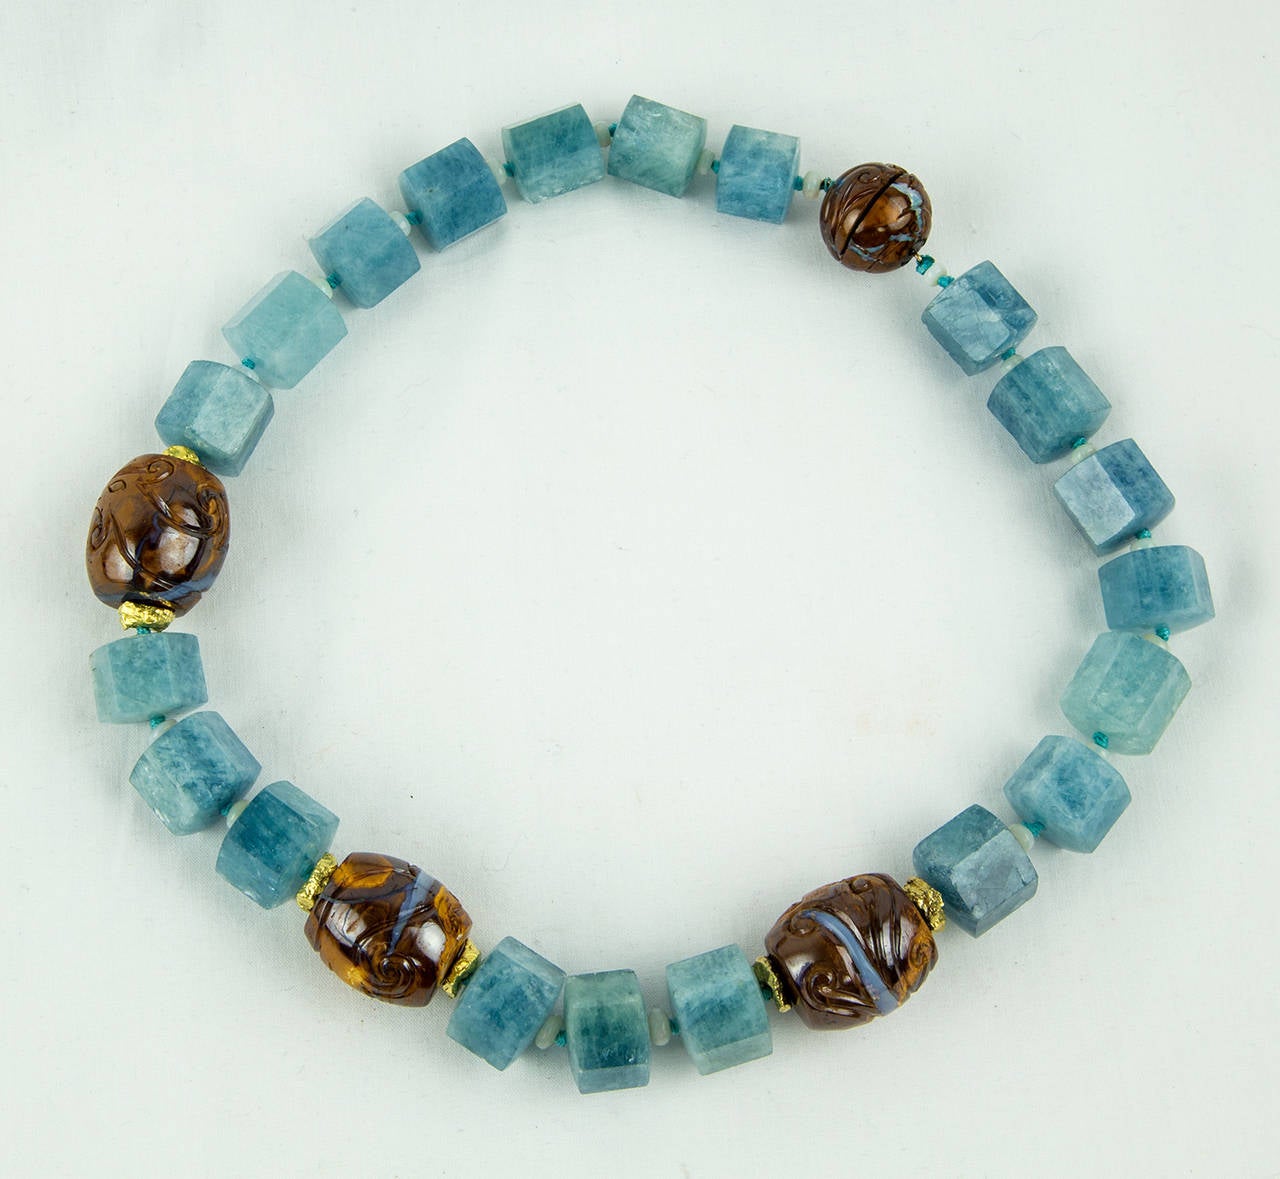 Featuring Hexagon Aquamarine and carved Natural Opal in Matrix Beads inter-spaced with Gilt Sterling Silver rondelles. It was such a pleasure to integrate the different materials to produce such unique Star Power!  Approx. length 17.5”.